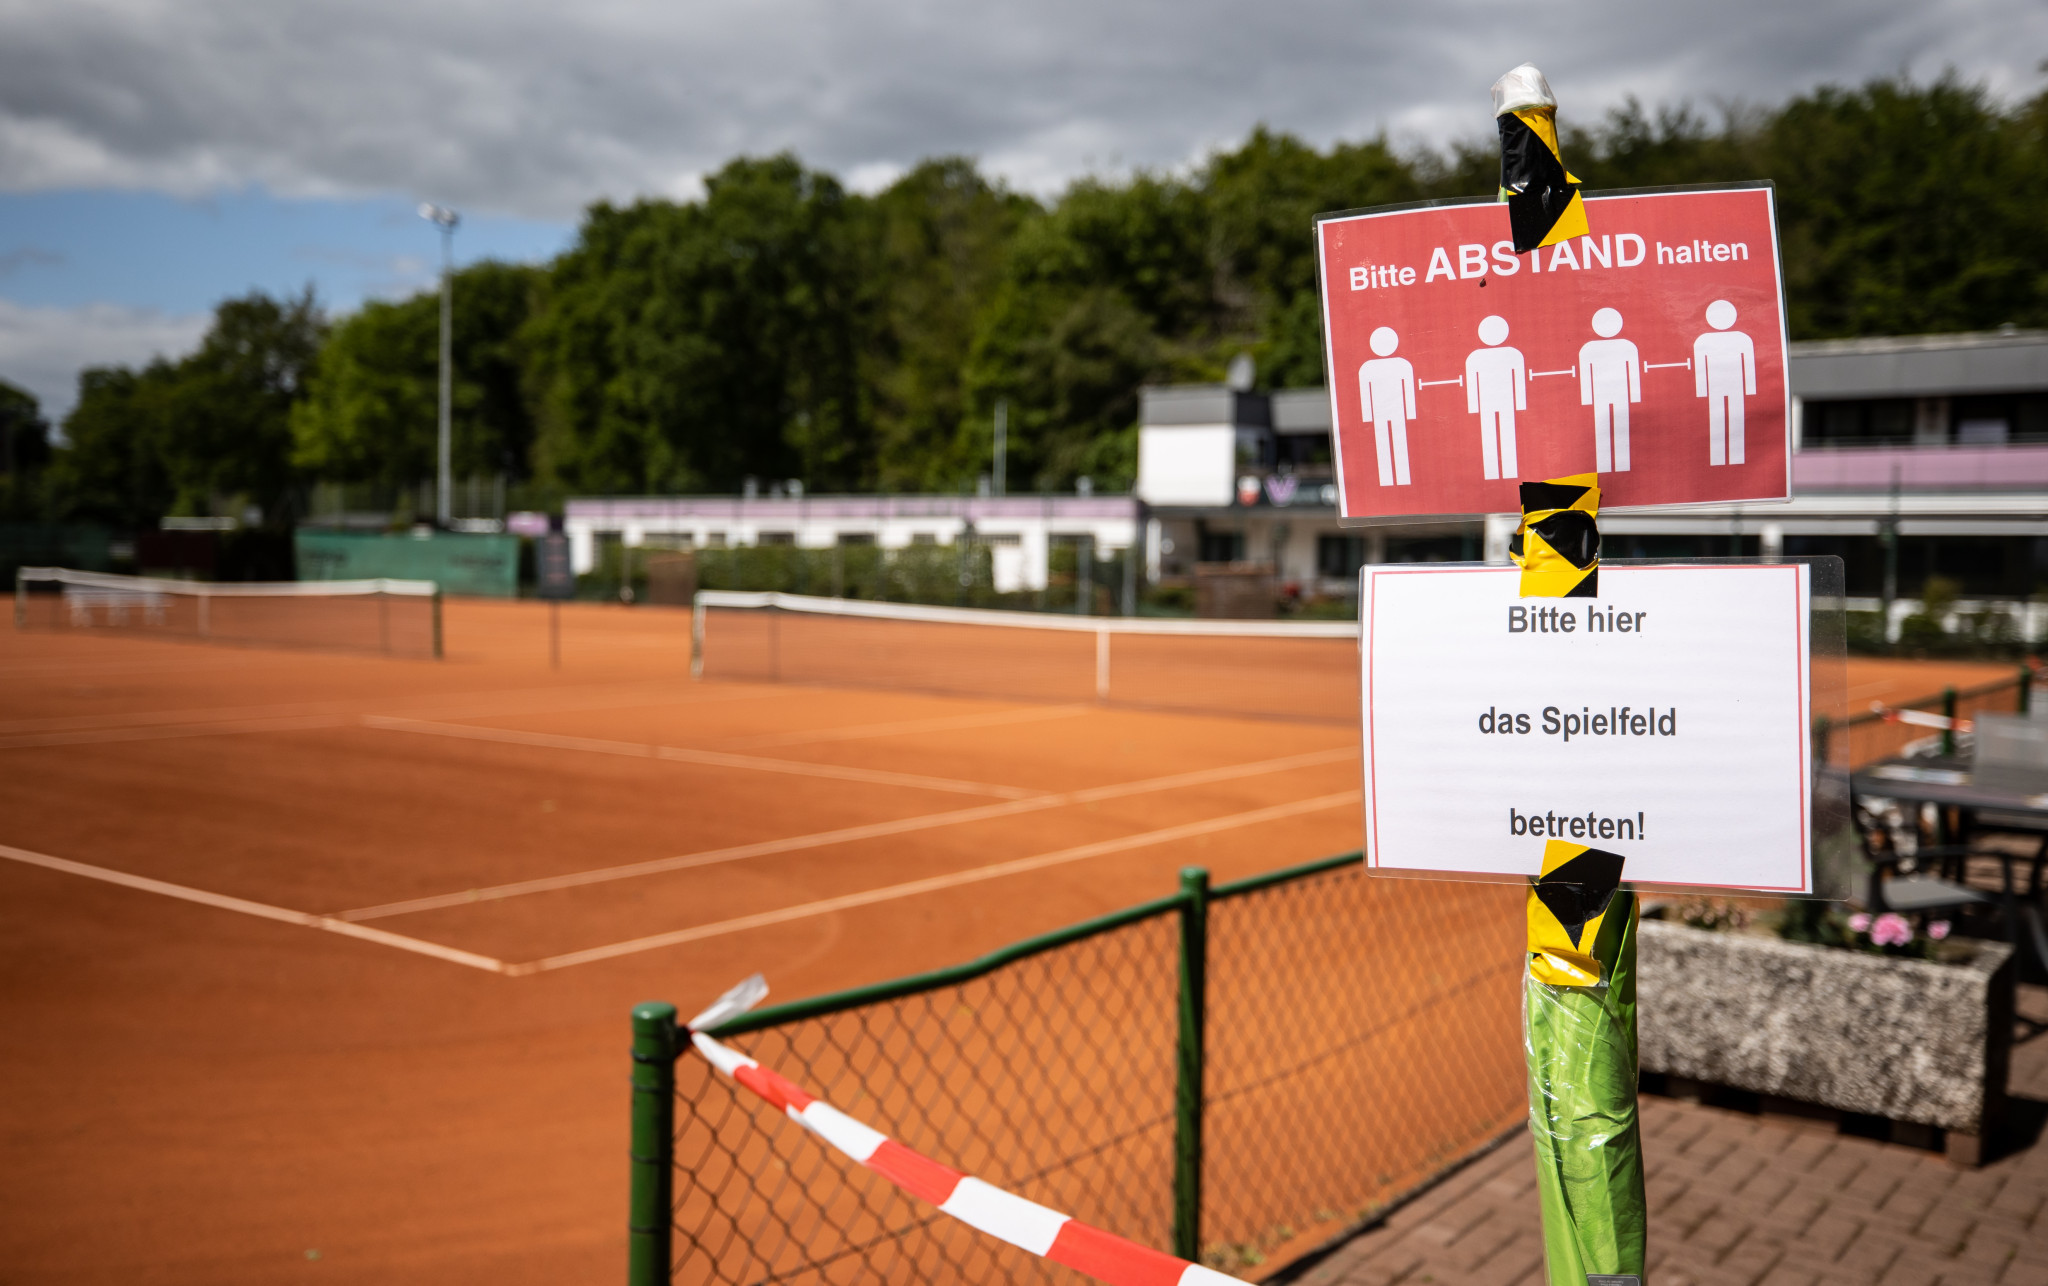 Germany's sports clubs have already been heavily affected by the COVID-19 pandemic over the past two years ©Getty Images